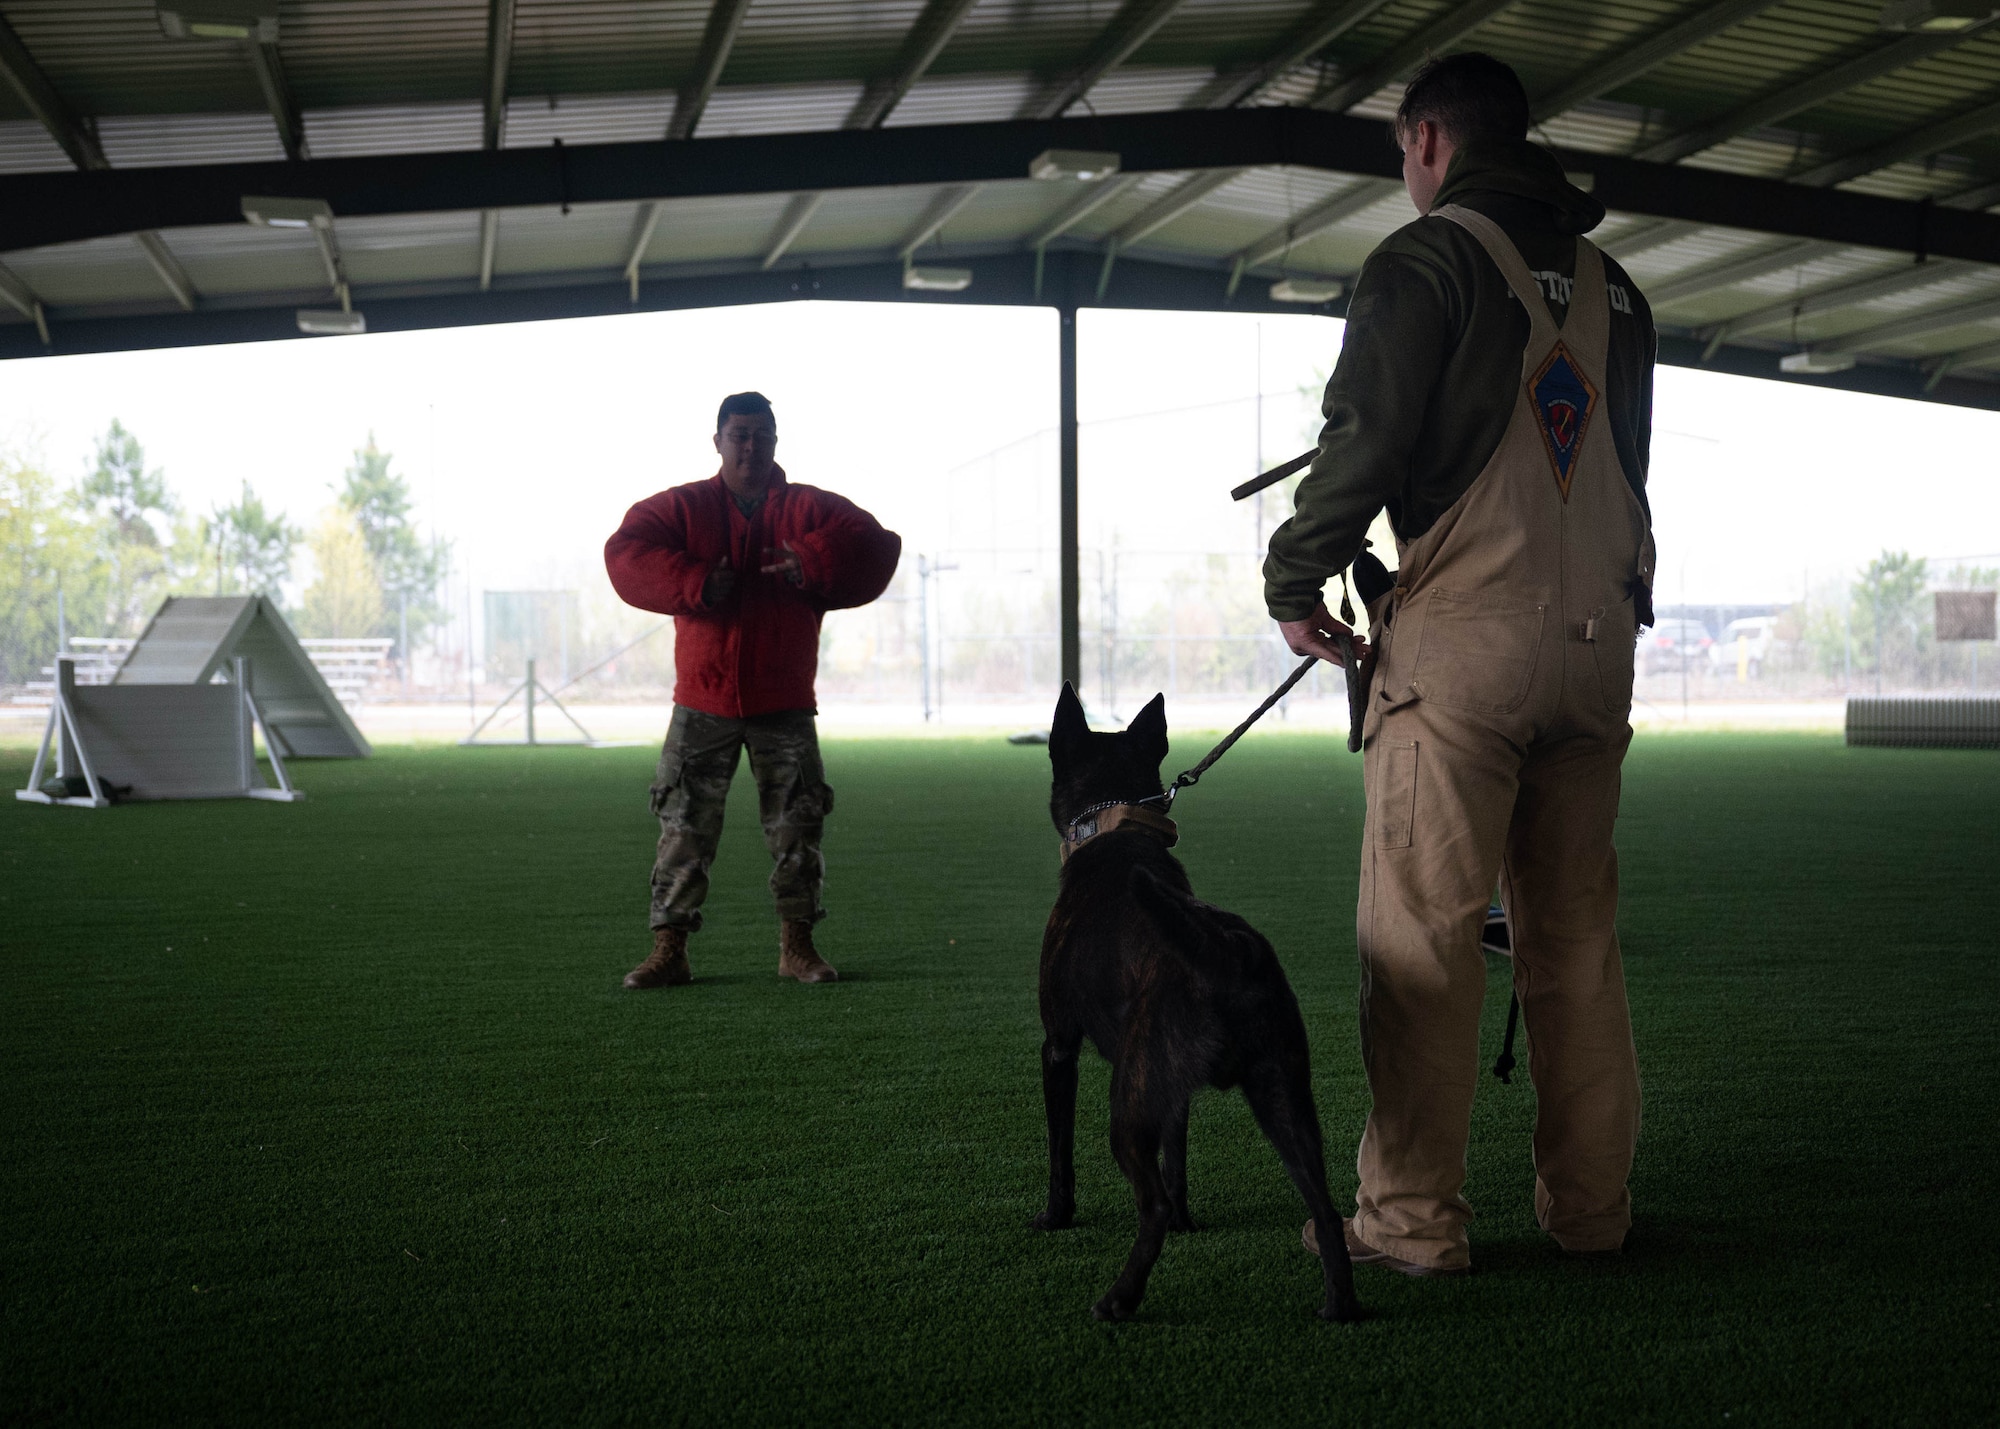 Two Airmen perform Military Working Dog training